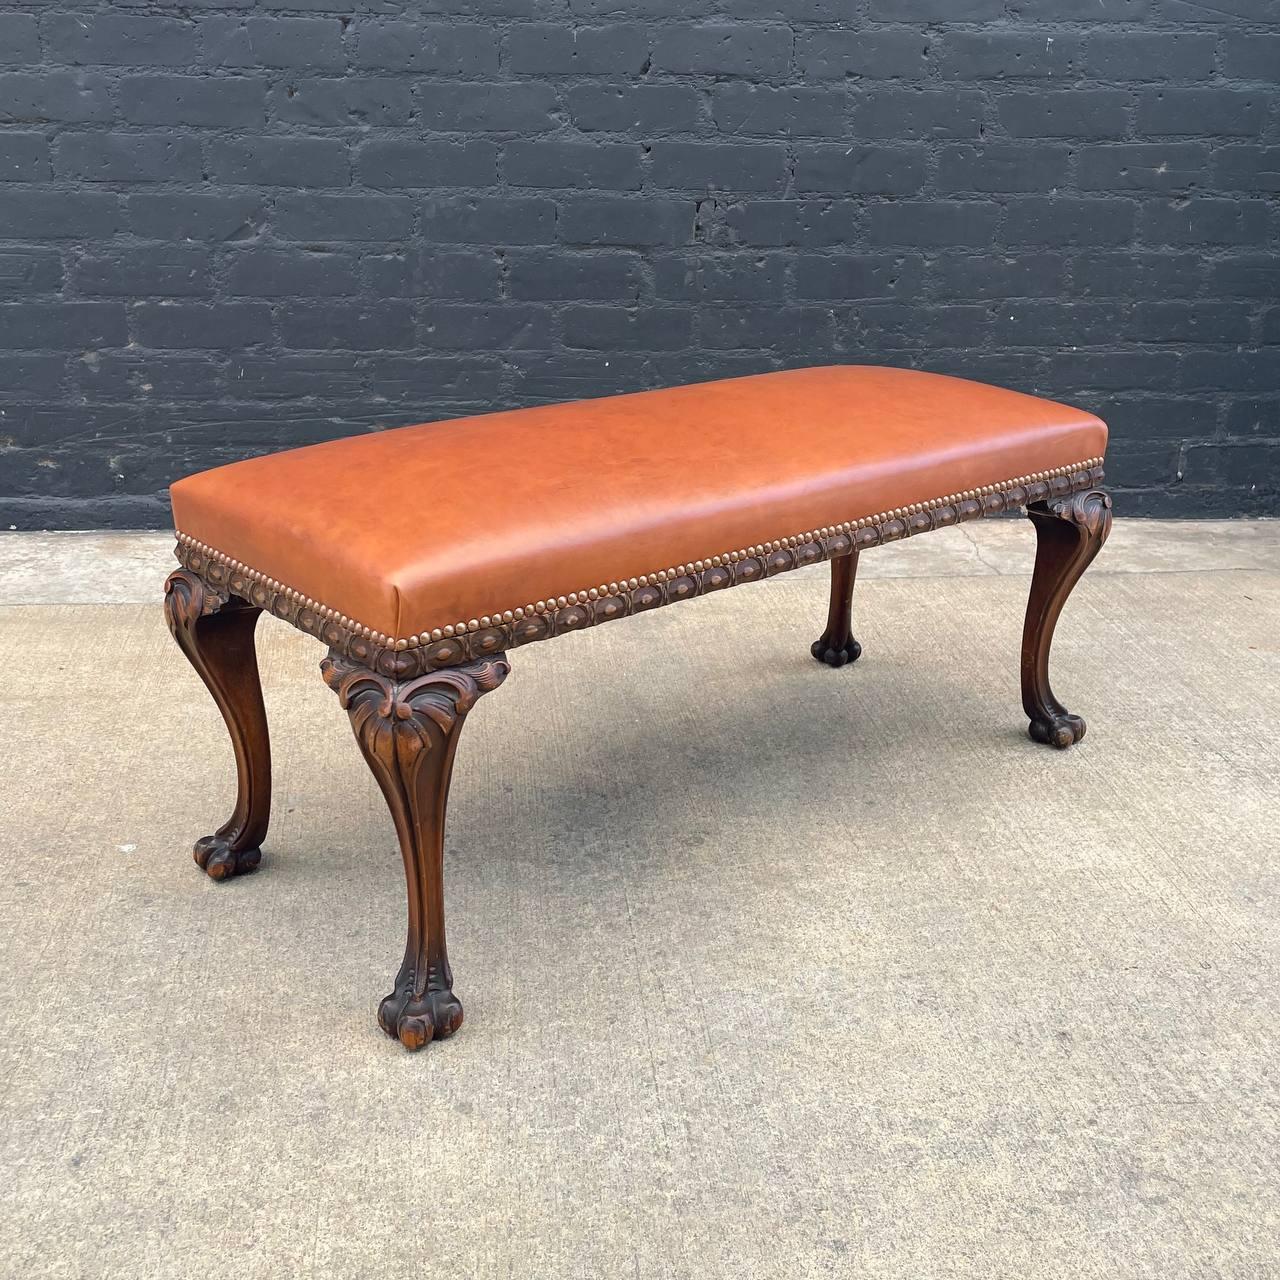 Antique English Chippendale Style Leather Bench with Carved Feet

Country: French
Materials: Carved Wood, Leather 
Condition: New Leather Upholstery 
Style: French Antique
Year: 1930’s

$2,895

Dimensions 
18”H x 43”W x 17”D.